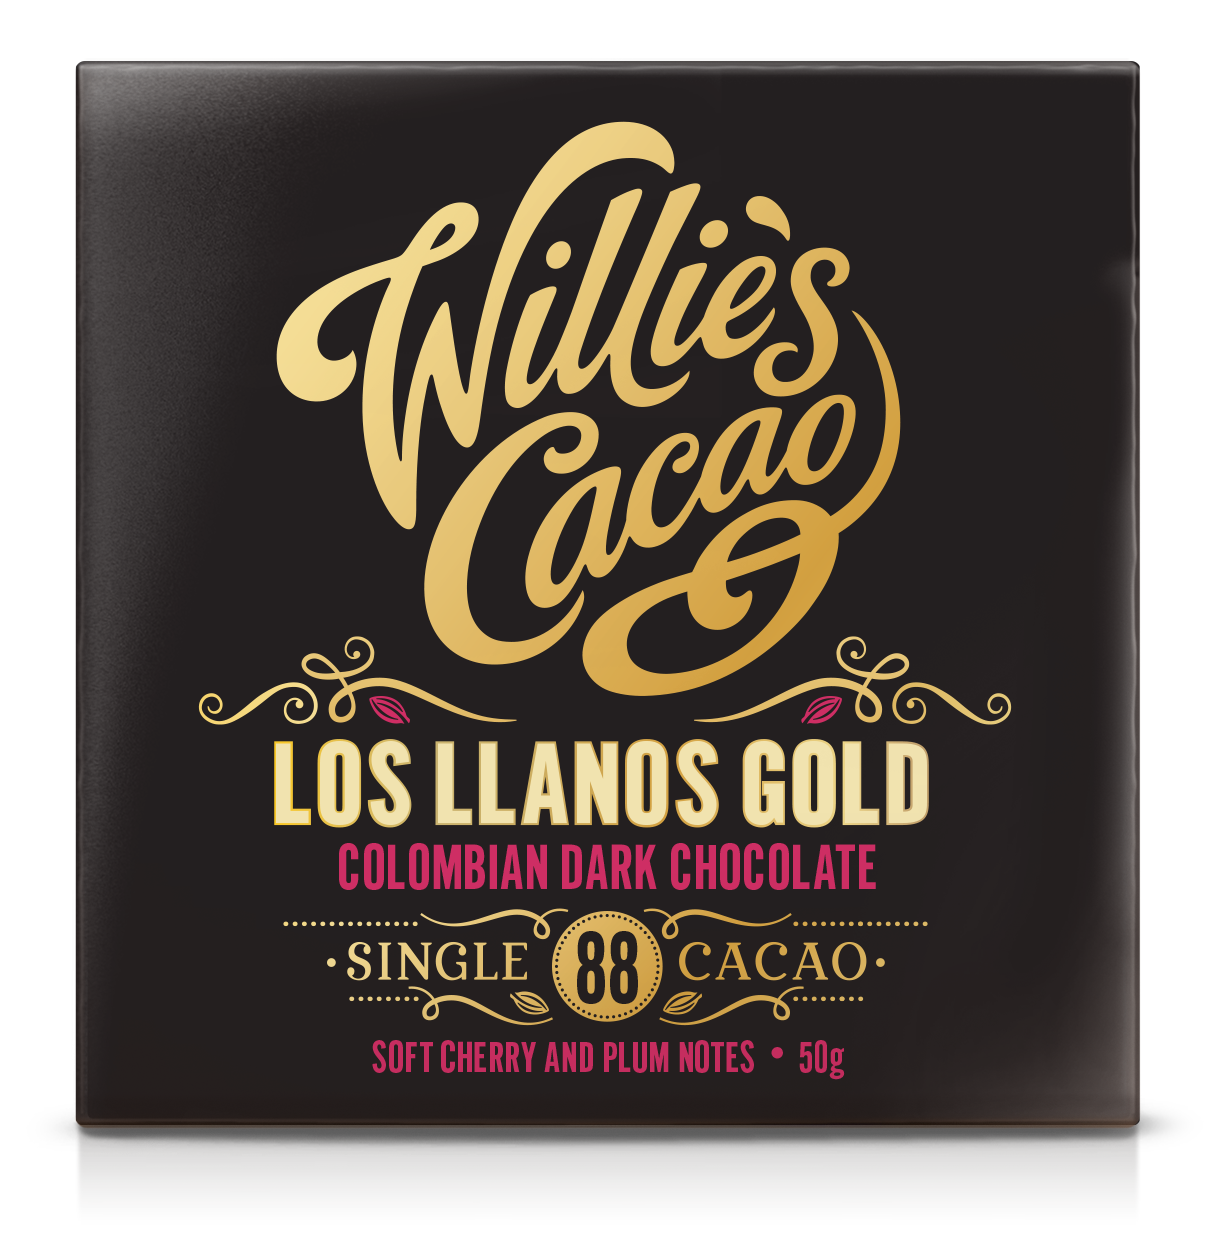 San Augustin Gold 88%, 50G, Willie’s Cacao